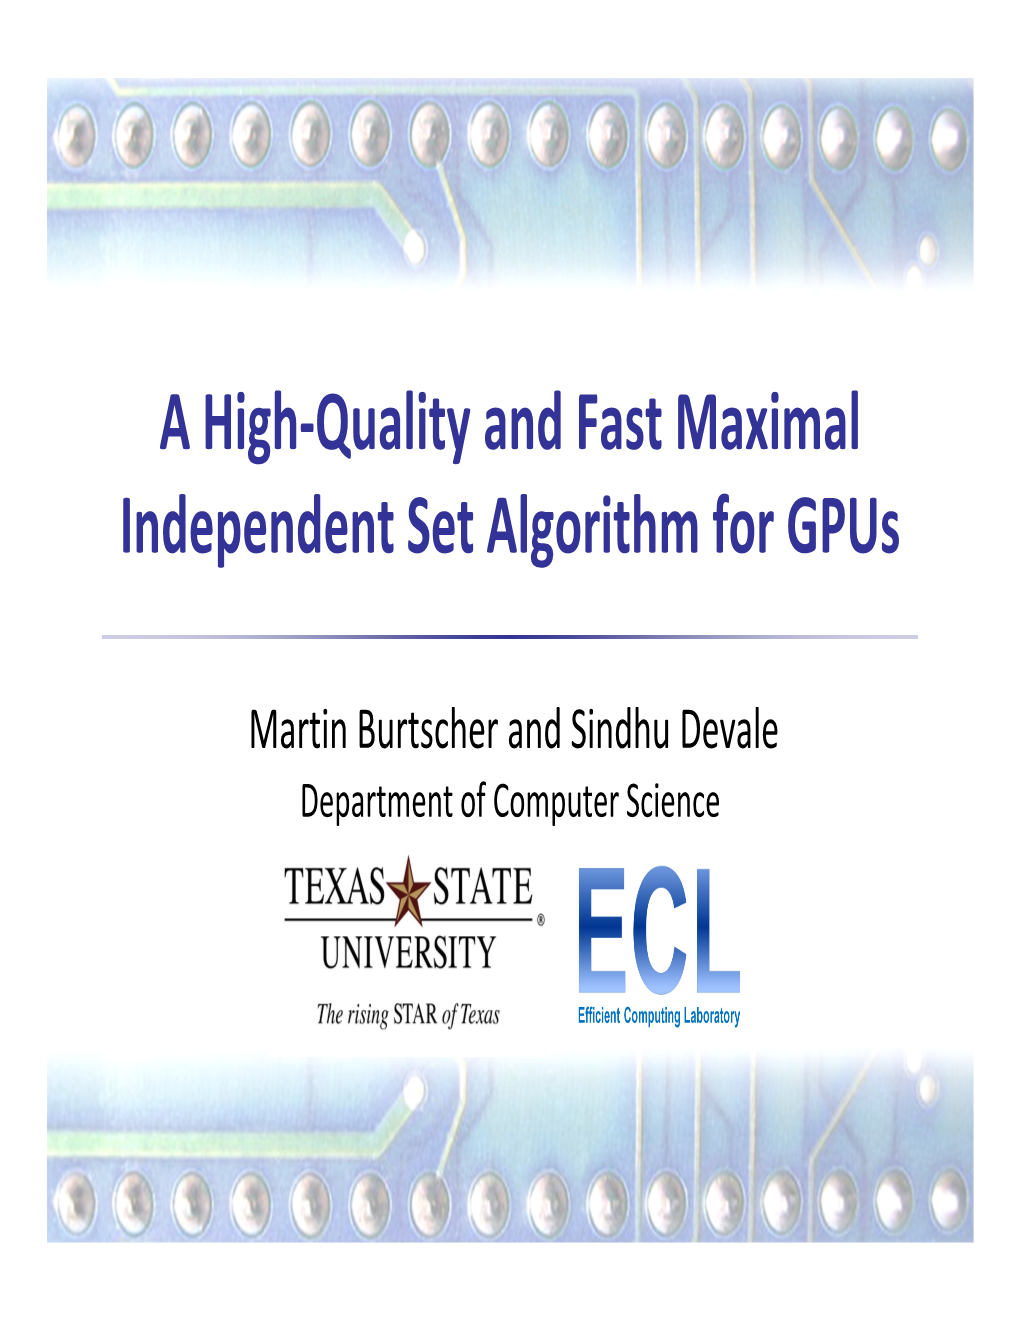 A High-Quality and Fast Maximal Independent Set Algorithm for Gpus